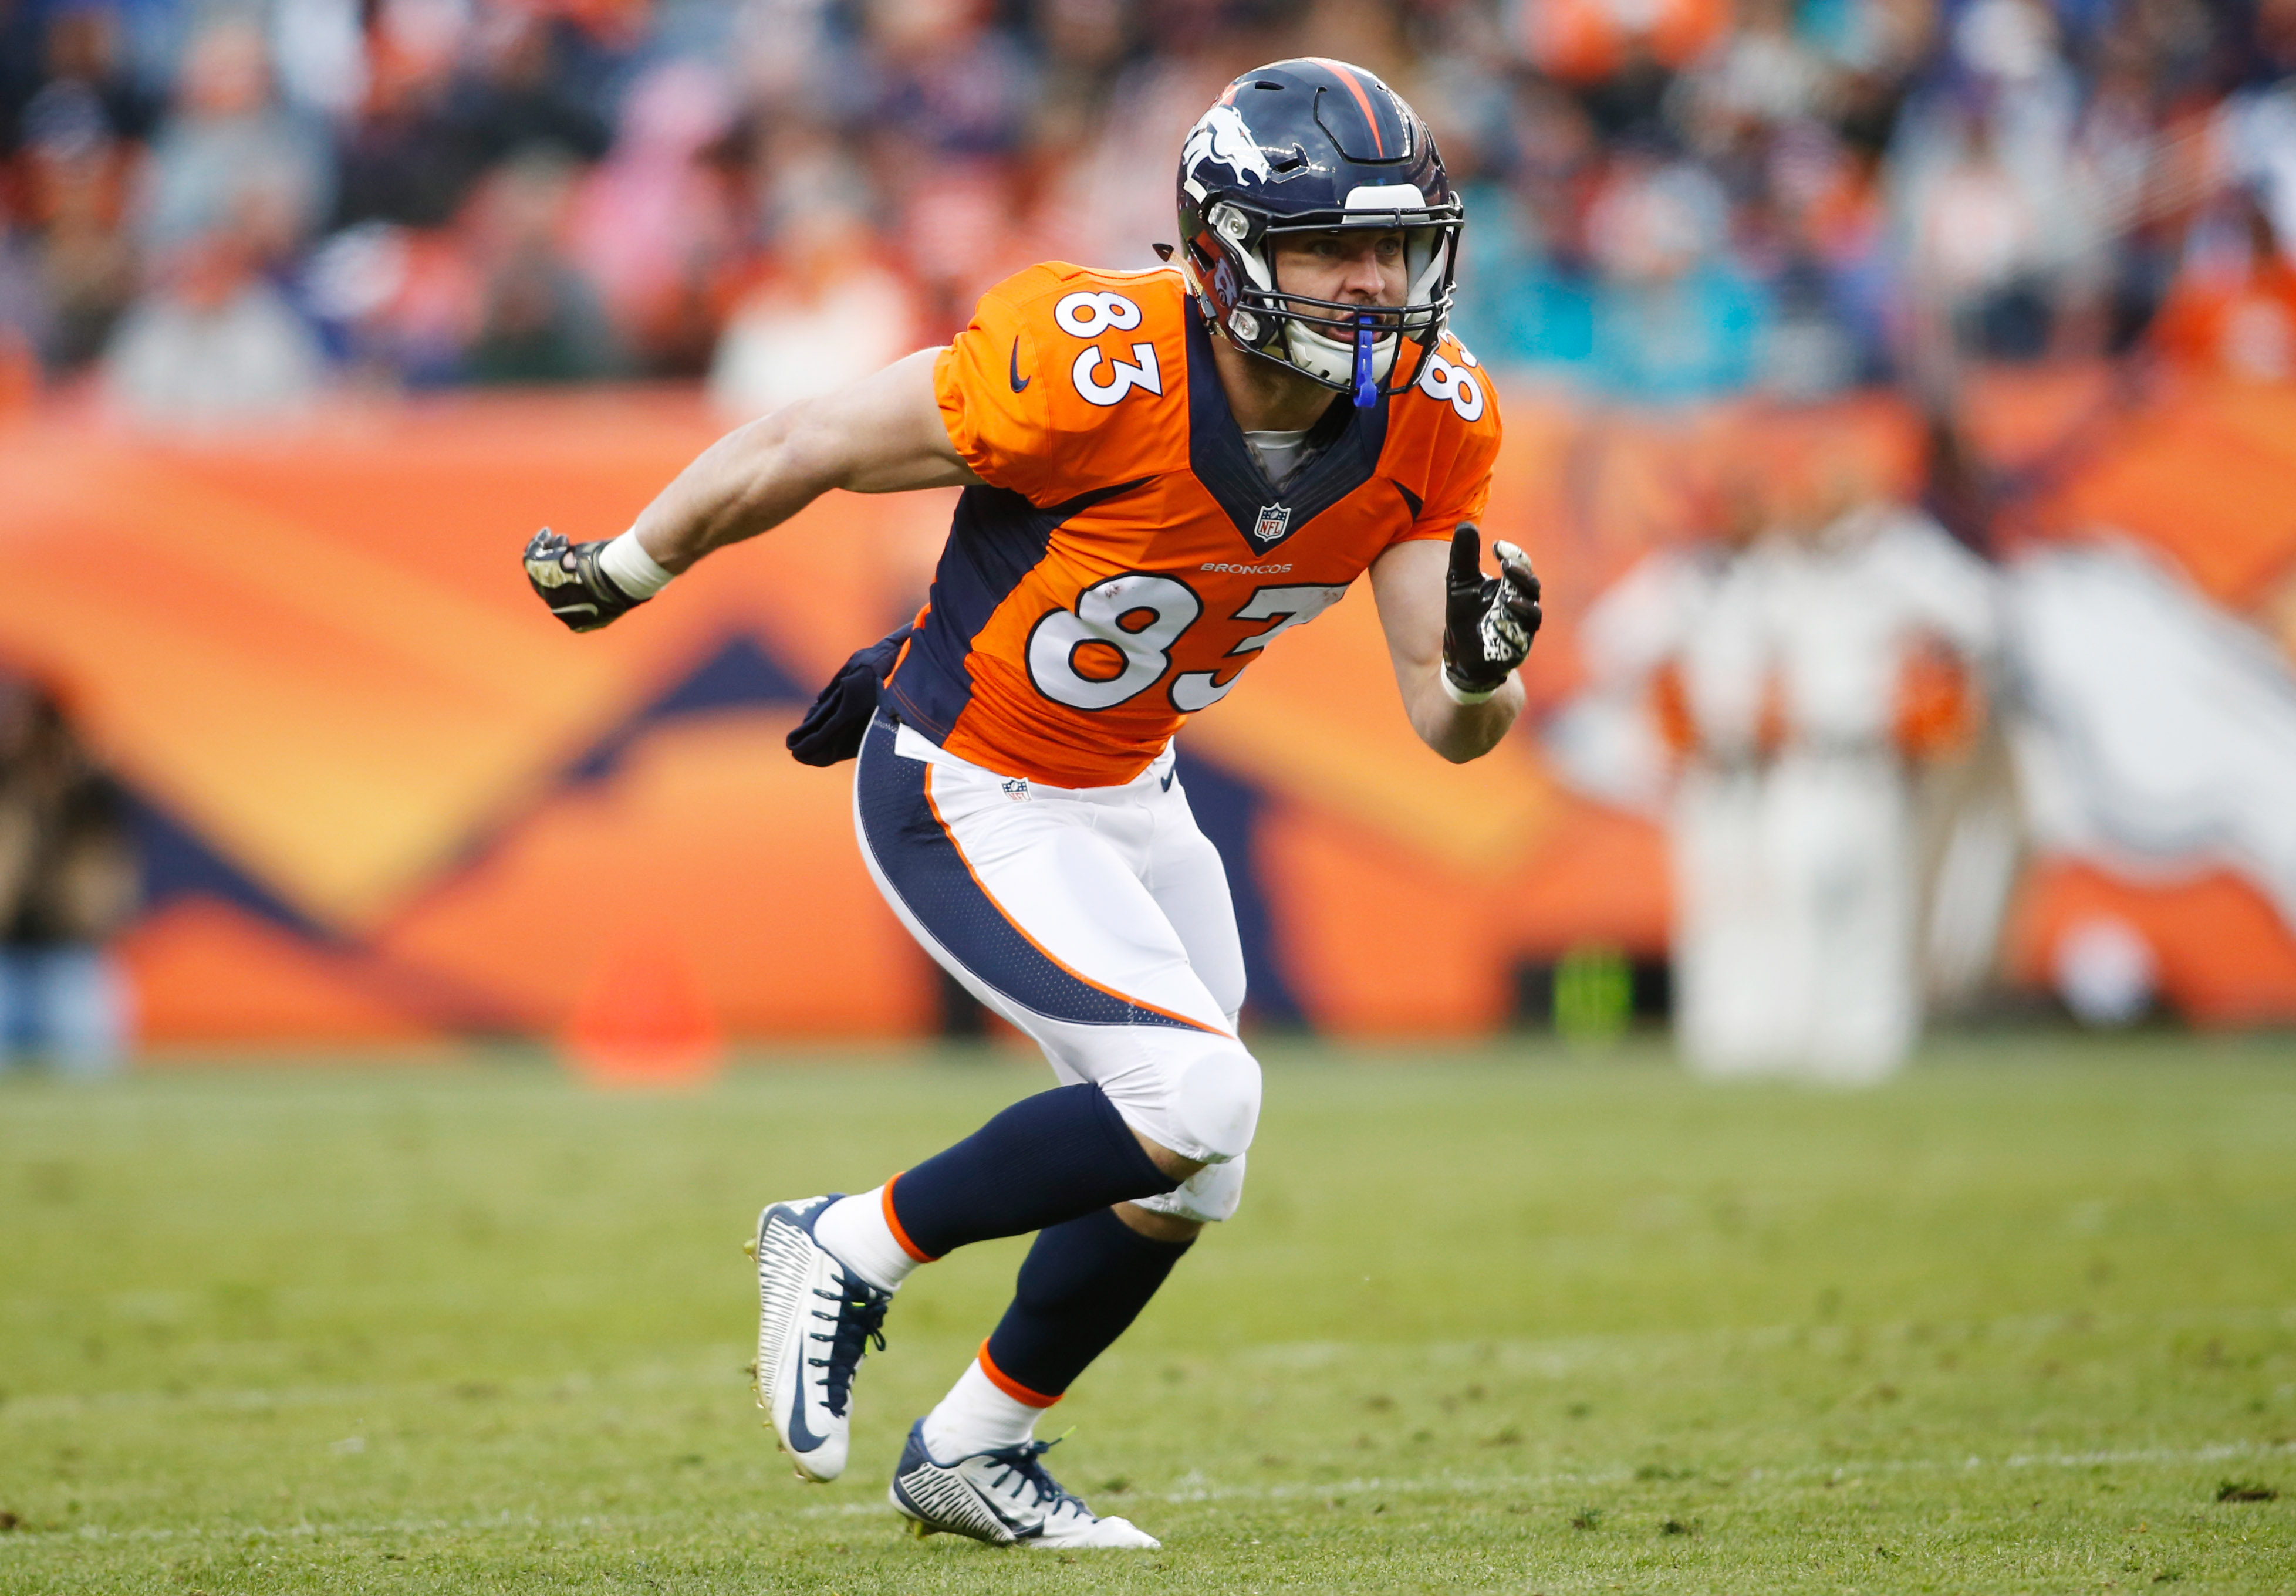 Wes Welker could be the spark Rams need